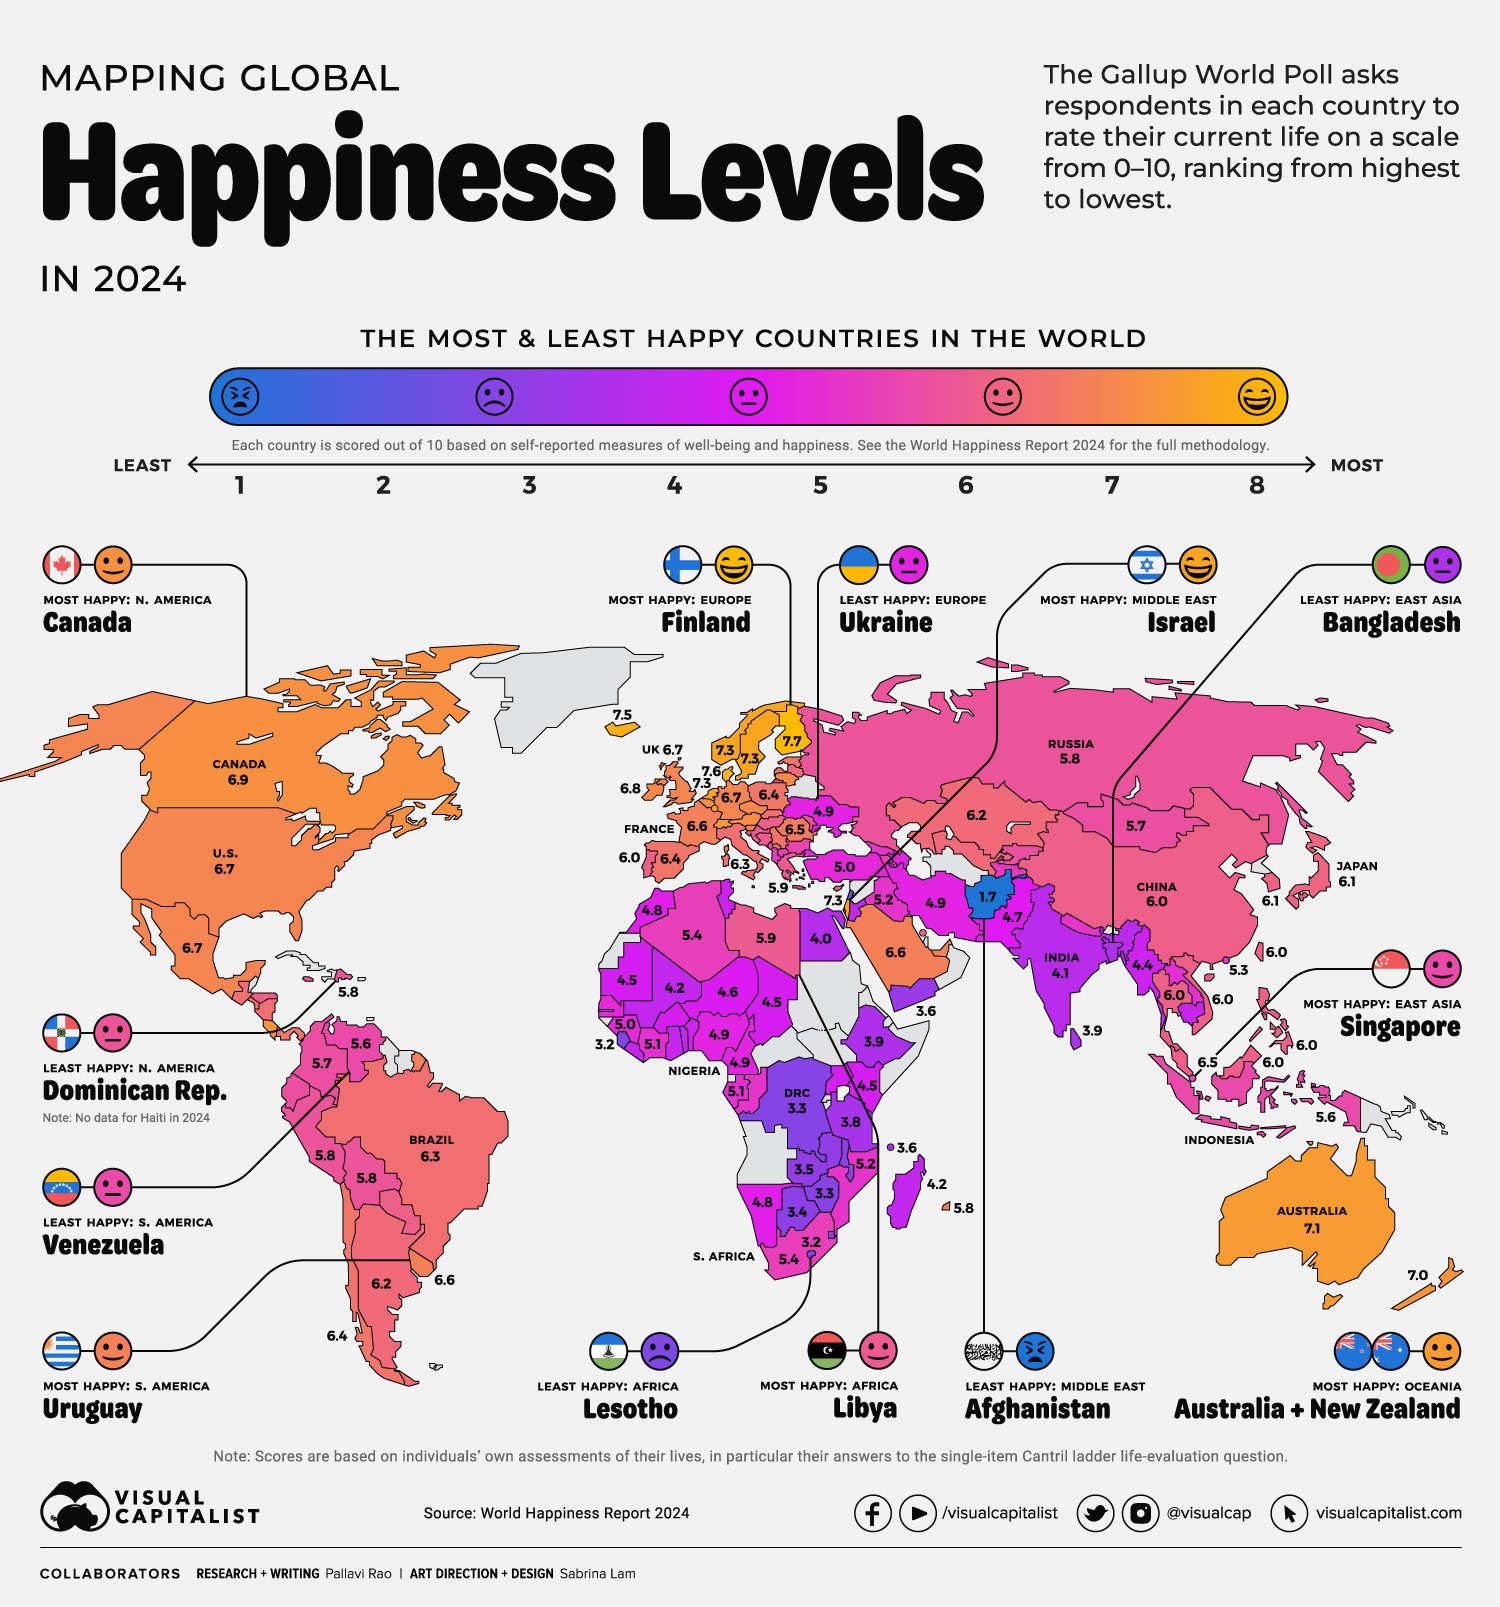 A map of the world, color-coded by the average happiness level in each country.